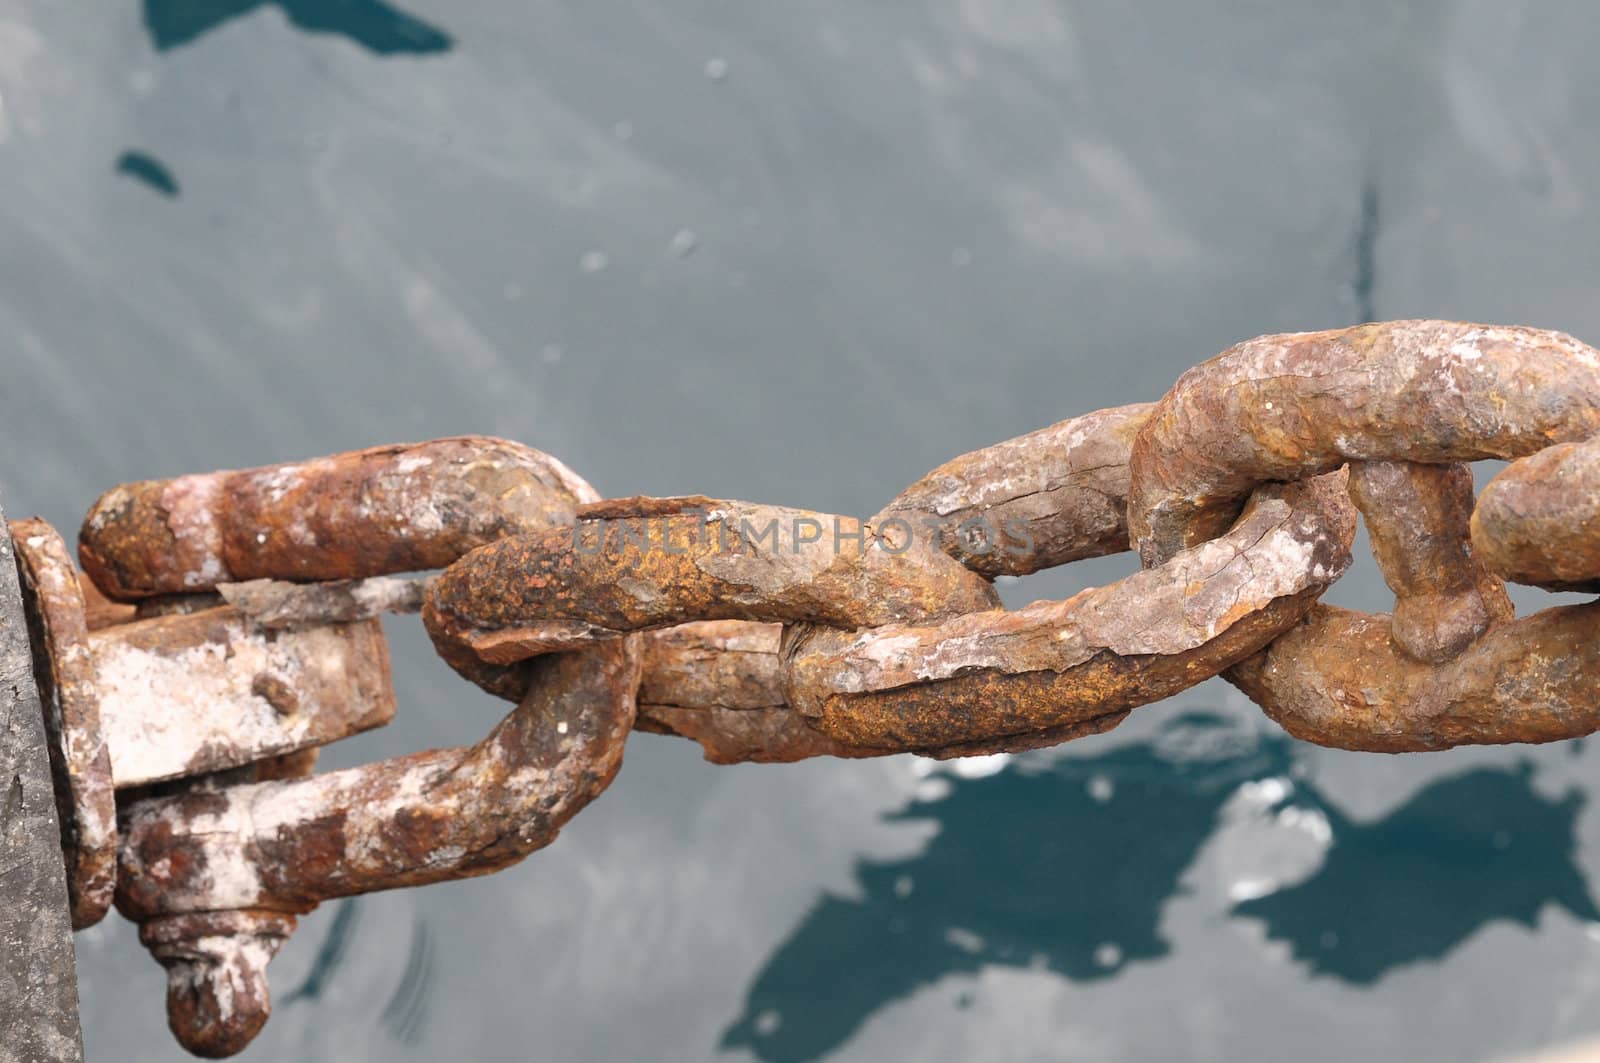 An Old Rusty Naval Chain, in Canary Islands, Spain